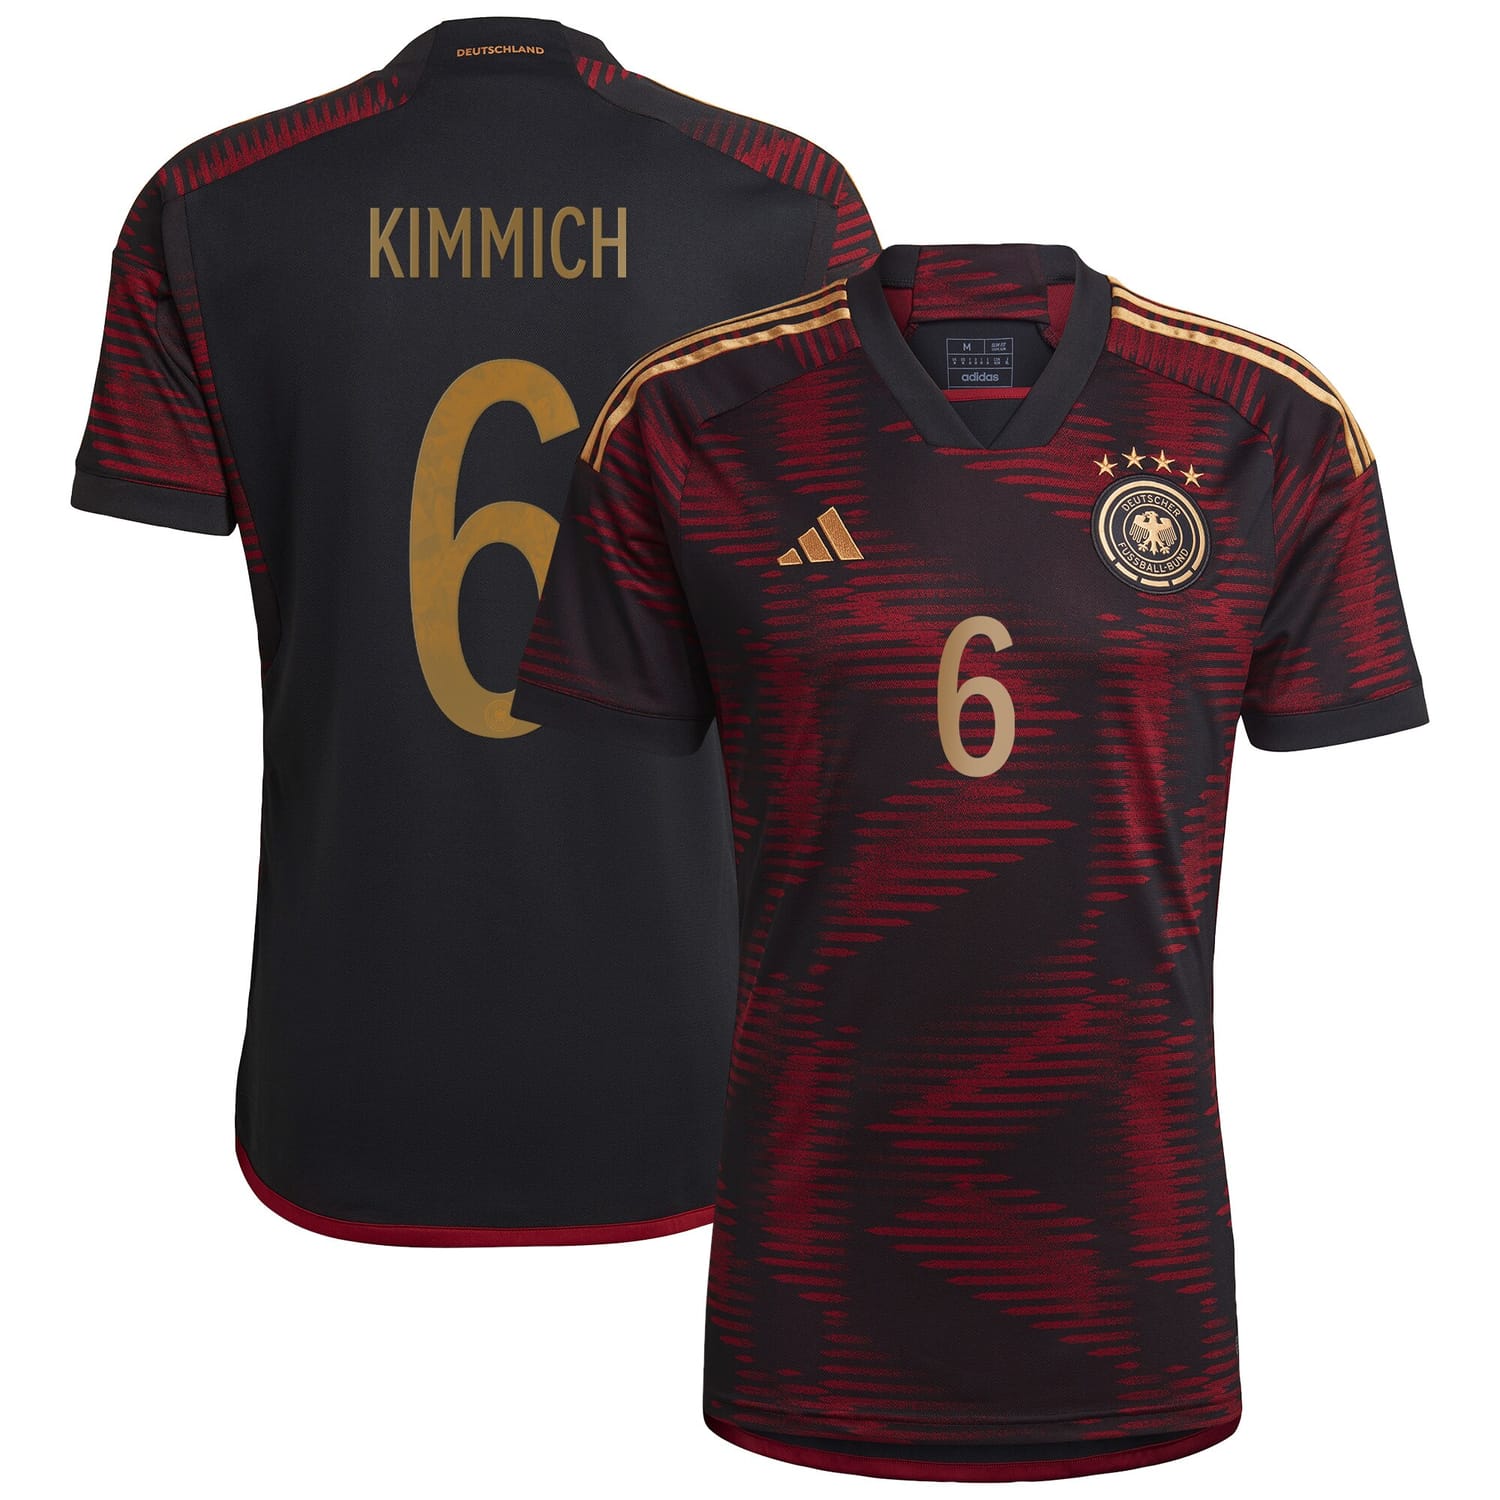 Germany National Team Away Jersey Shirt player Joshua Kimmich 6 printing for Men